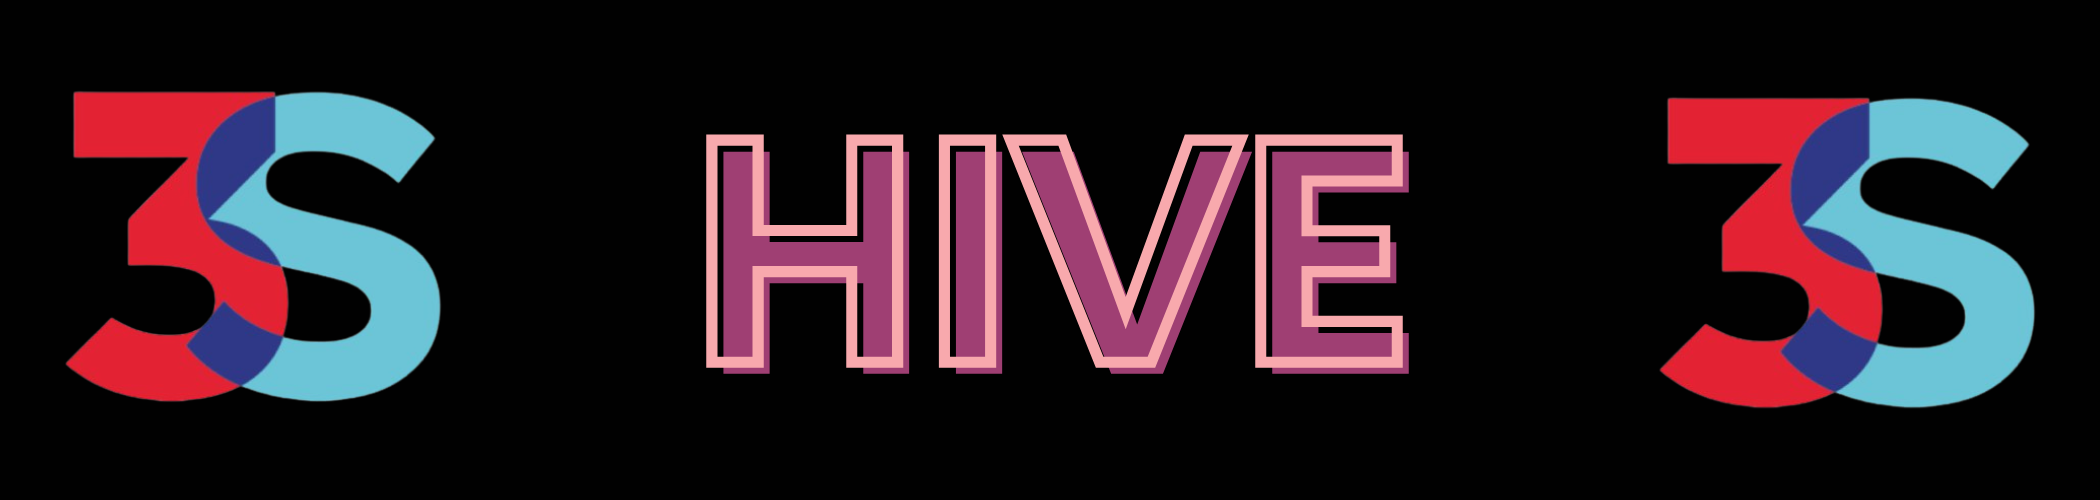 HIVE (1).png